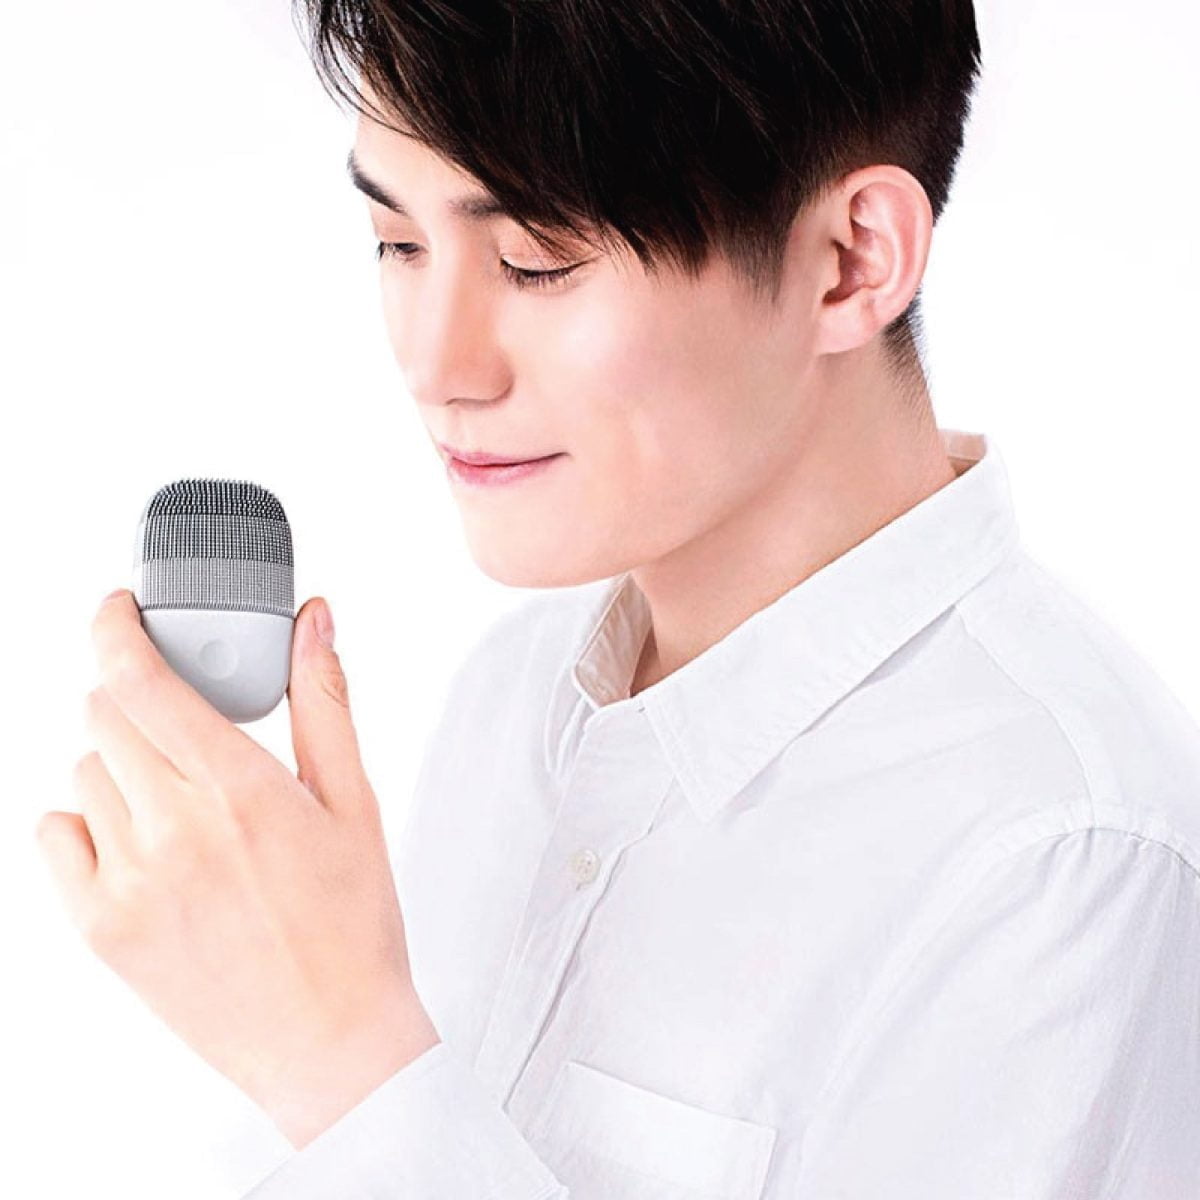 Wtf3 01 Xiaomi &Lt;Strong&Gt;Deep Cleansing Of The Face - 3-Speed Modes - 3 Cleansing Areas - Made Of Hypoallergenic Silicone - Long Battery Life - Default 90S Cleaning&Lt;/Strong&Gt; Xiaomi Mijia Inface Smart Face Cleaner - Orange (2019 Design Award)